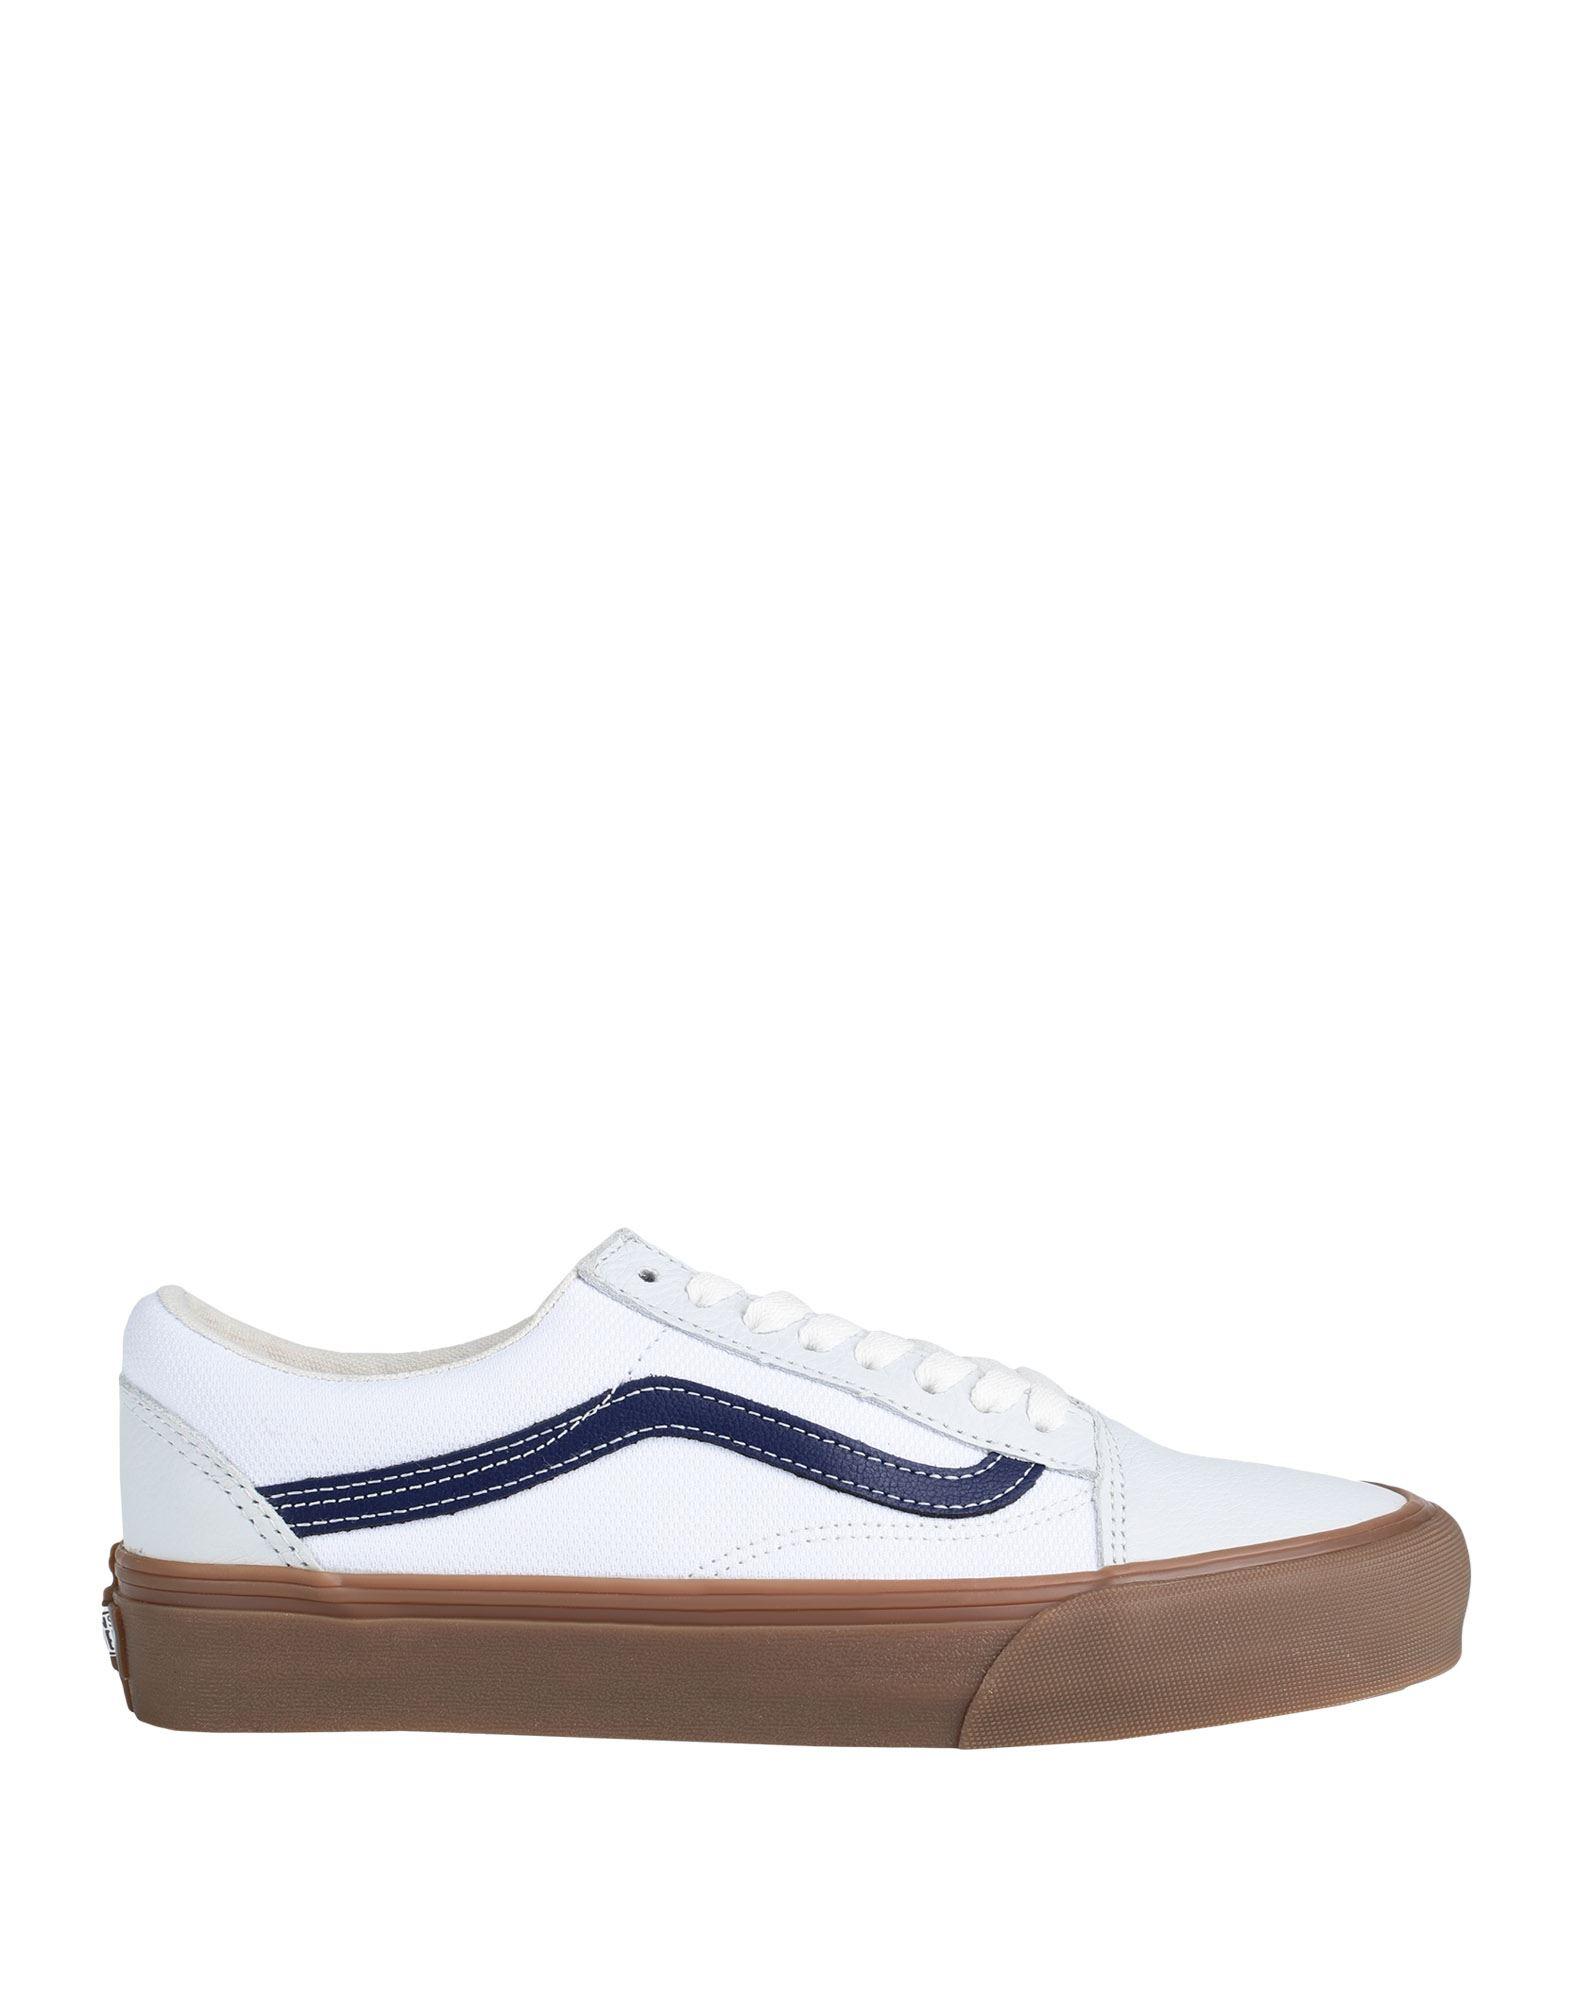 Vans Trainers in White